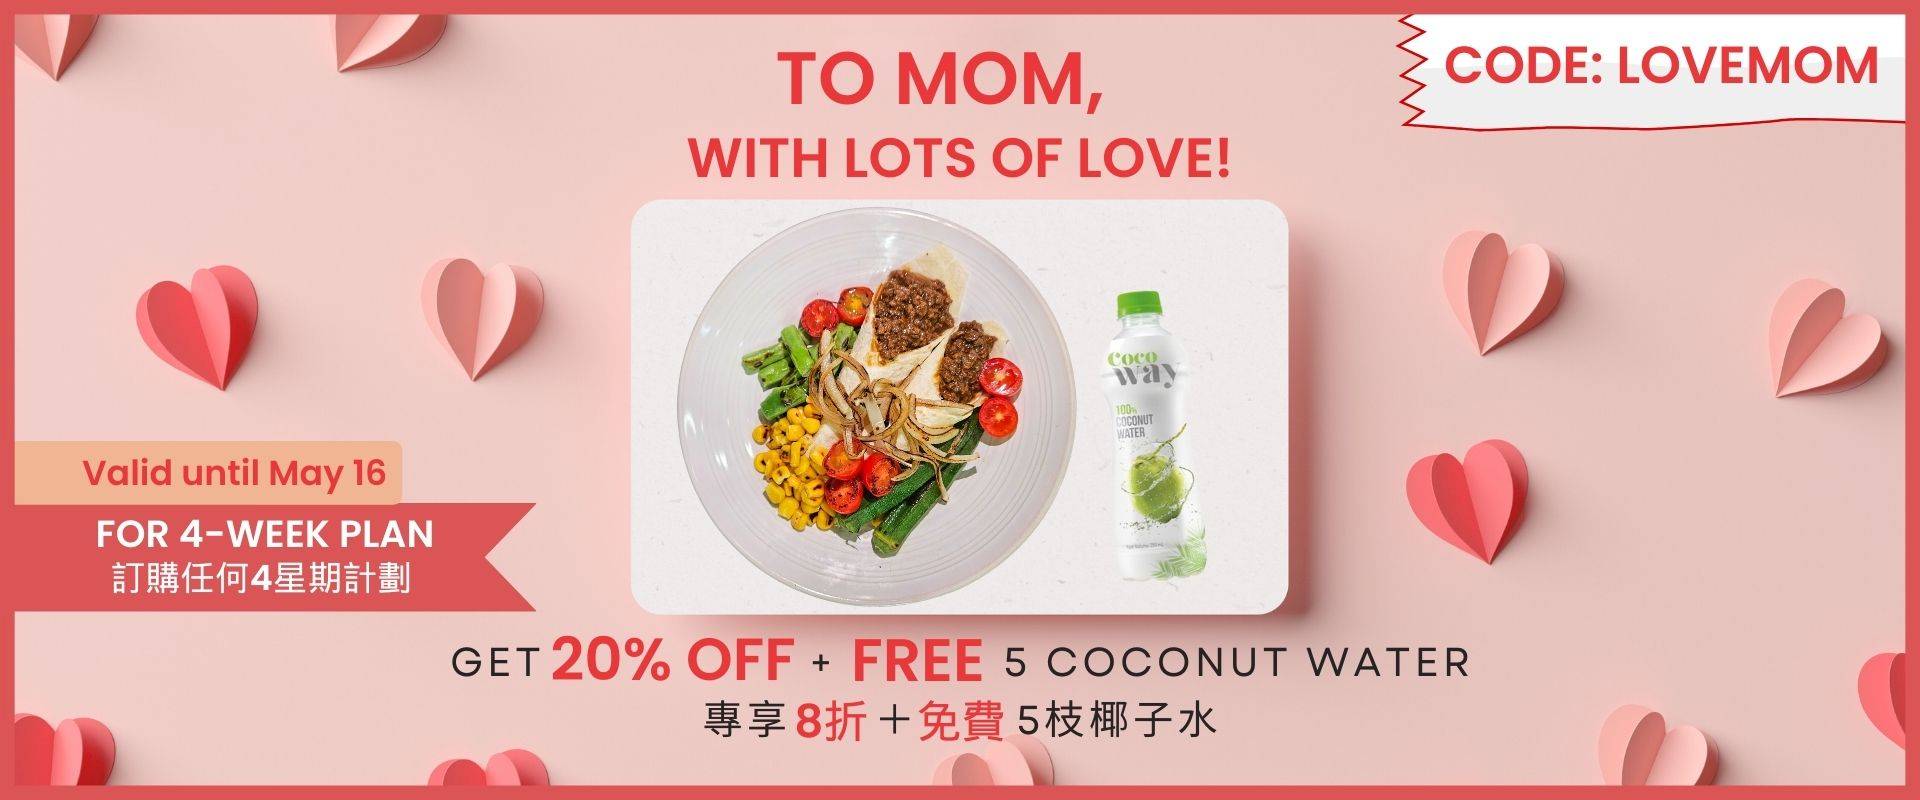 FITTERY Mother's Day Offer | Get 20% off and Free 5 Coconut Water on any 4-week meal plan